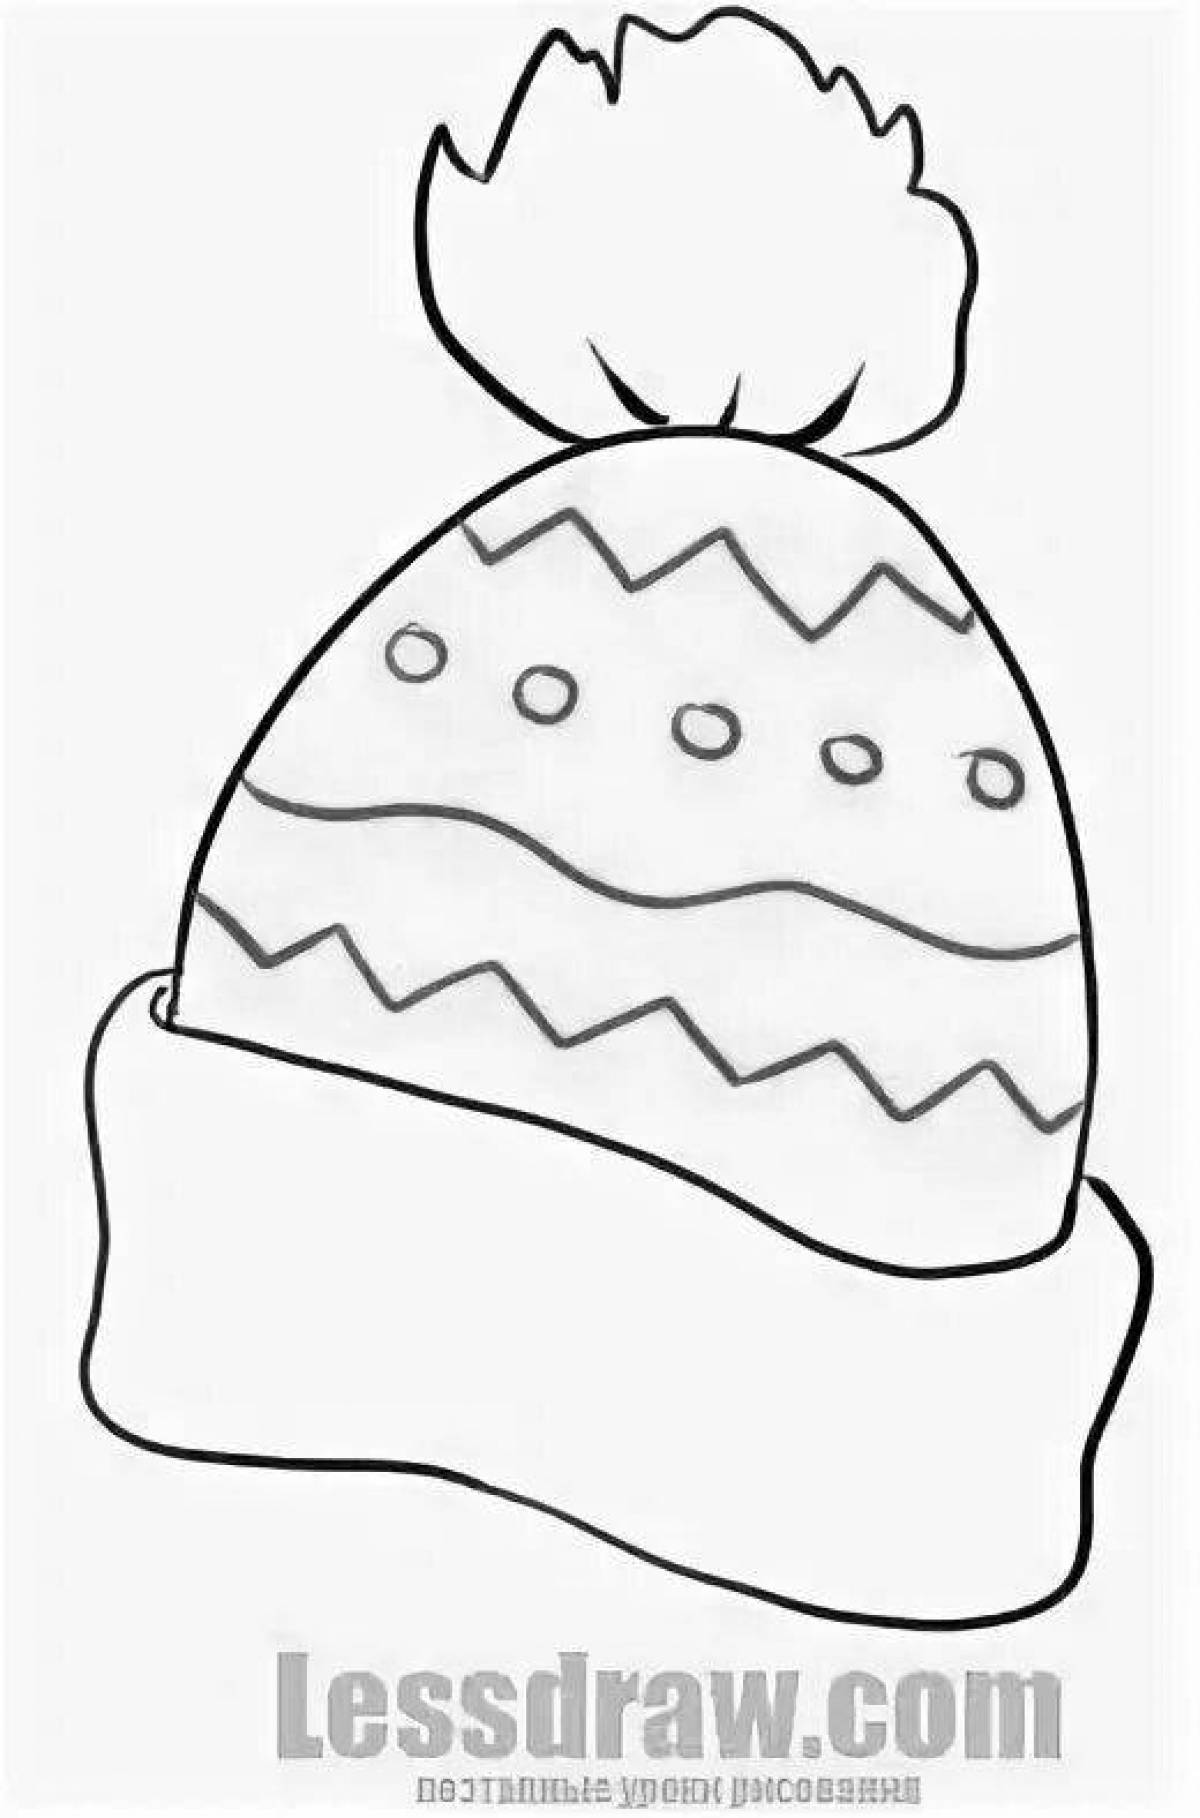 Merry winter hat coloring book